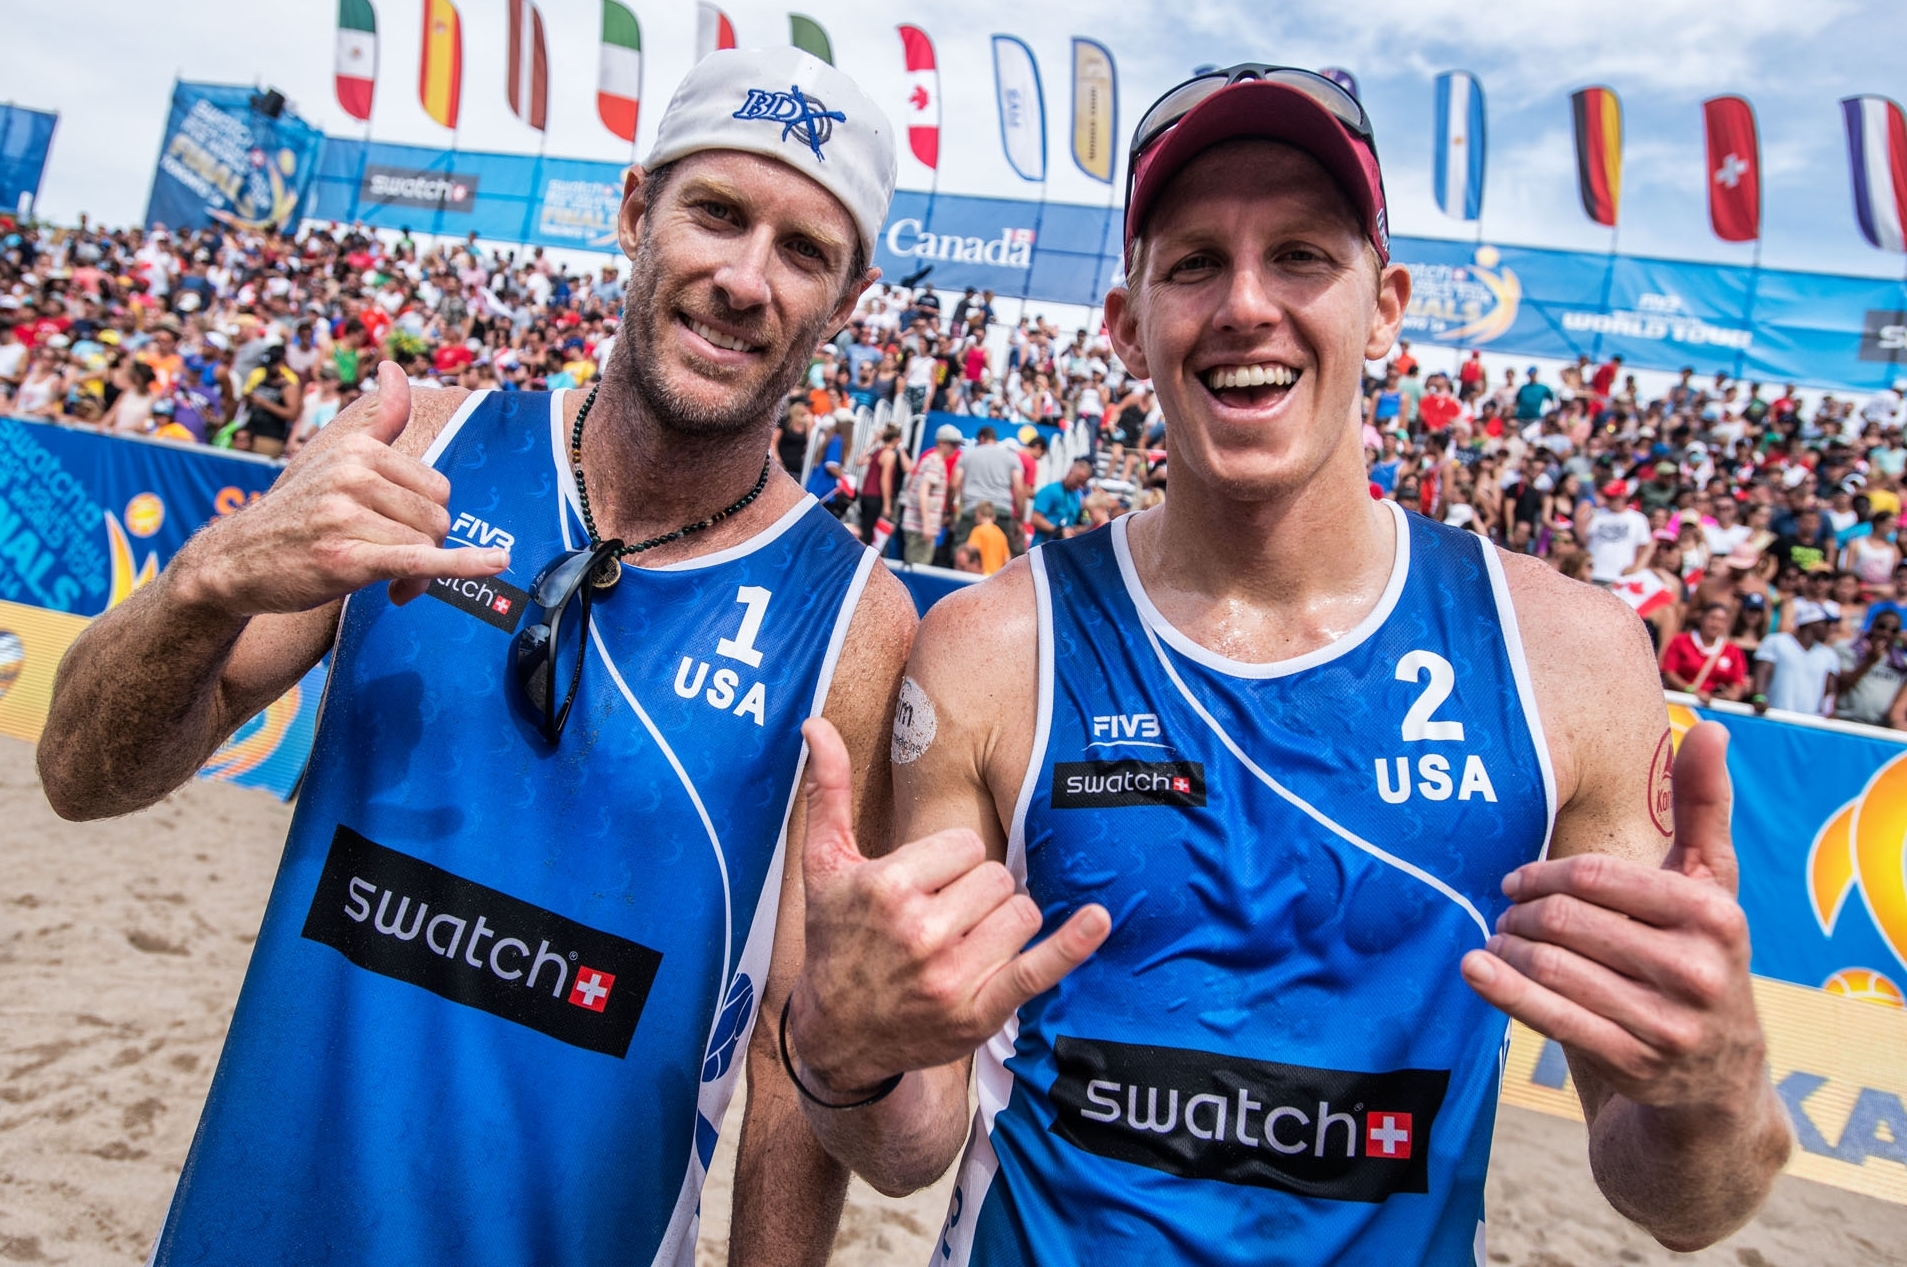 Bronze for these boys! Congratulations John and Tri!